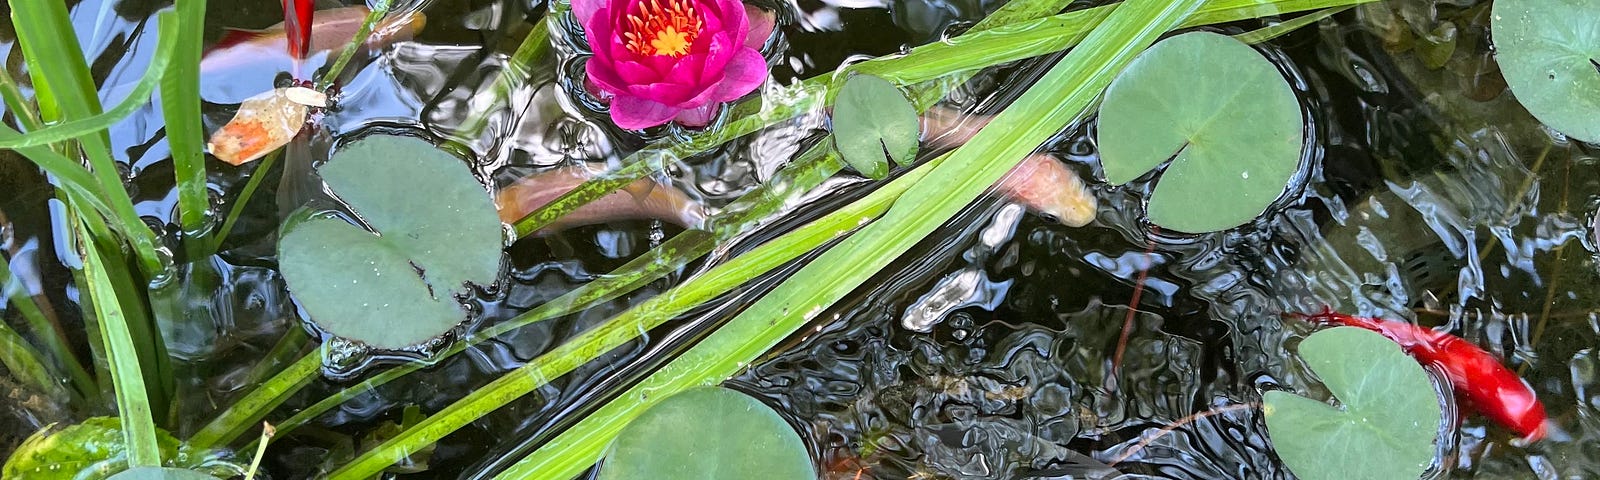 Close-up of a fish pond